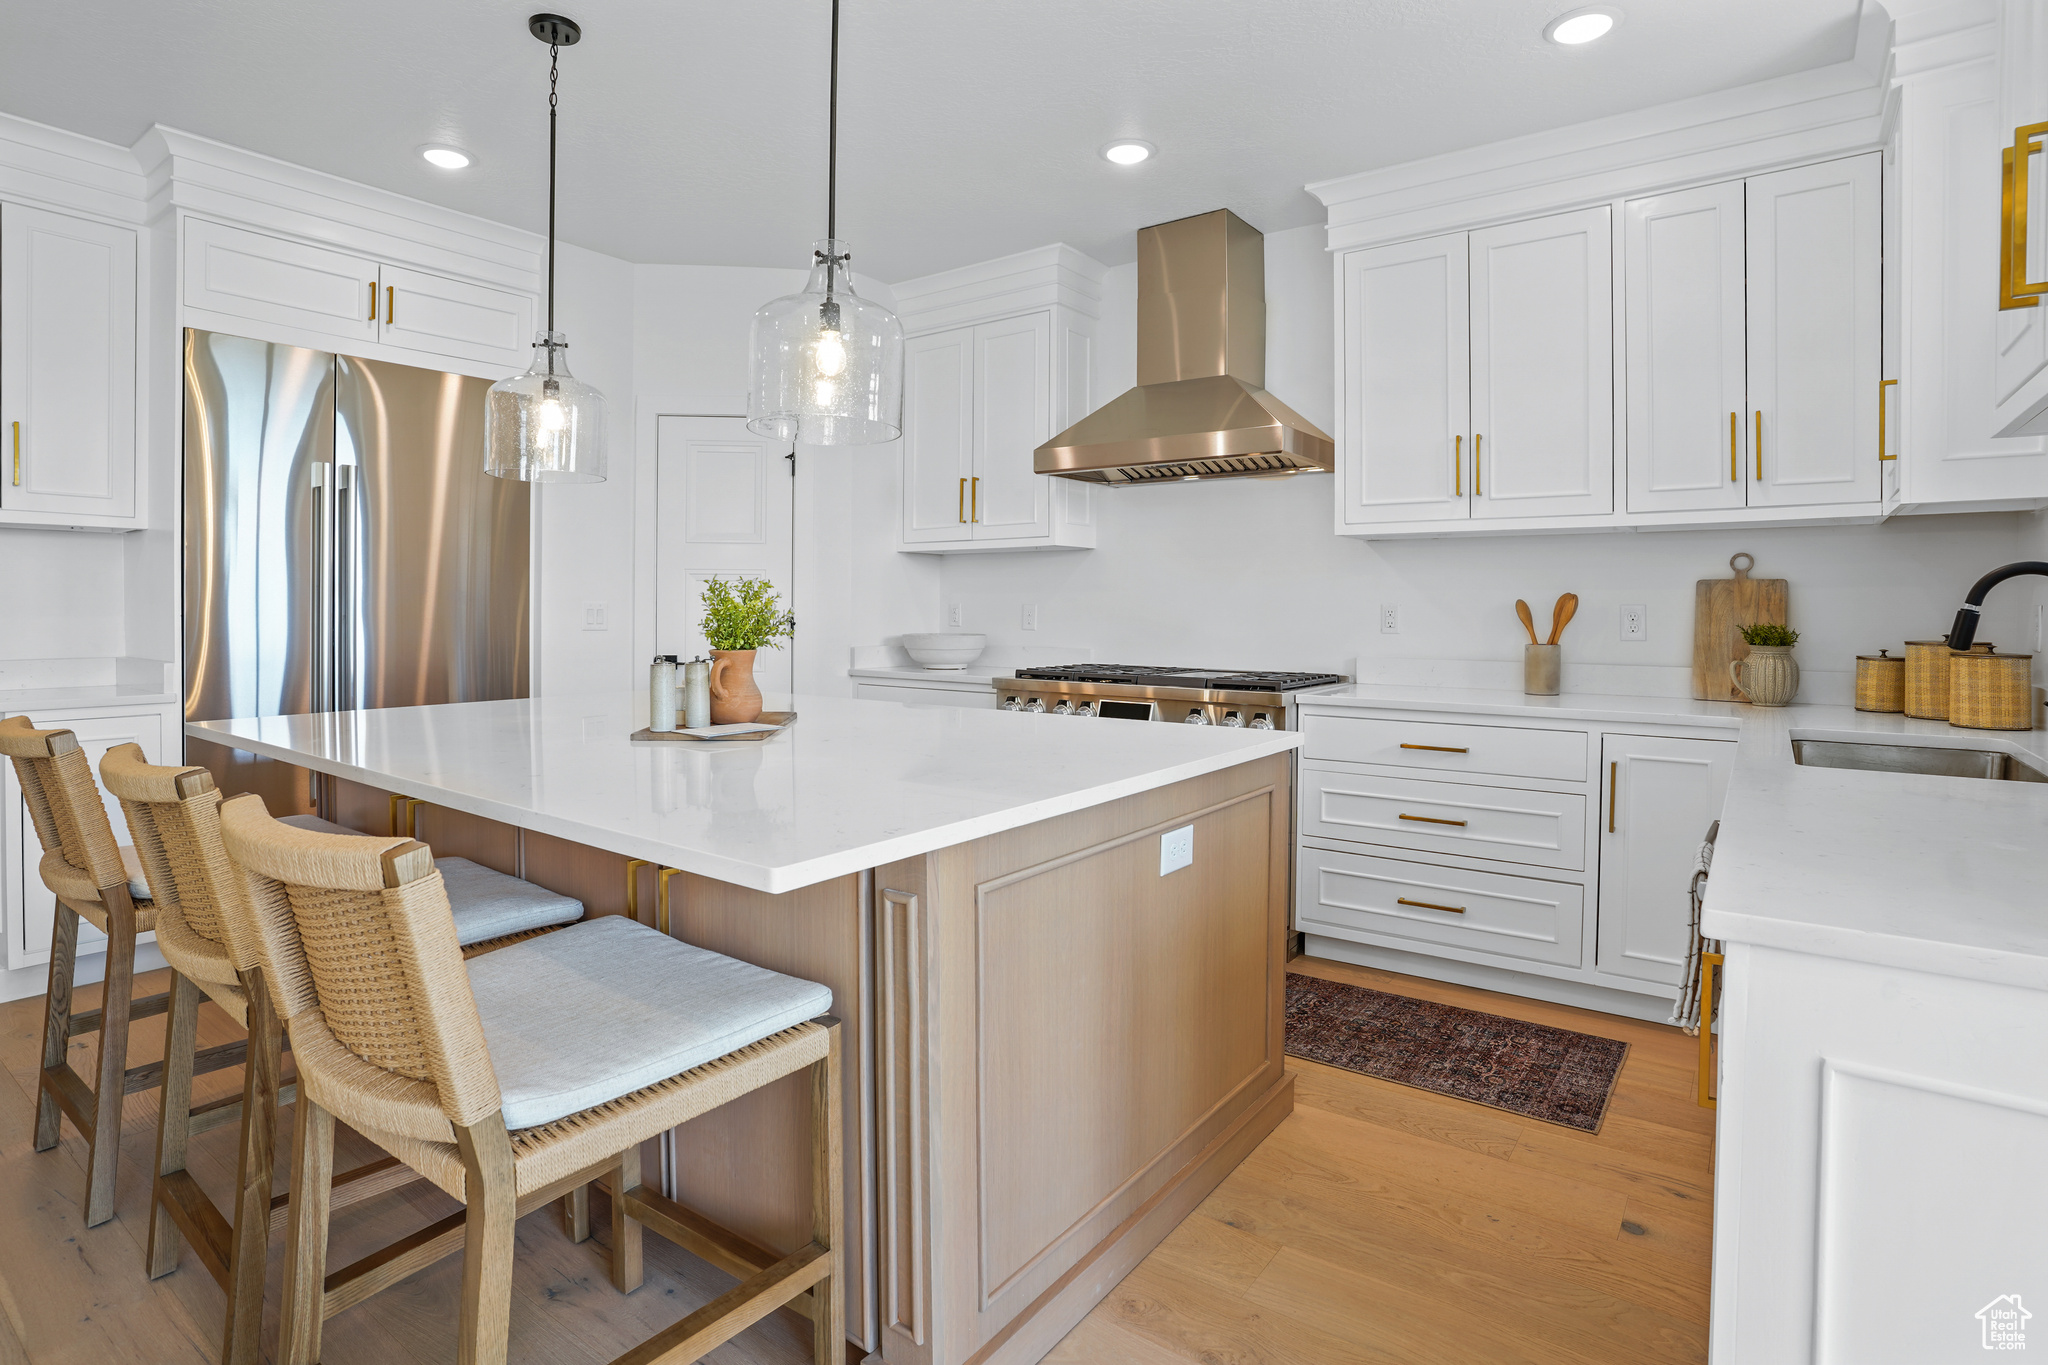 Kitchen featuring a kitchen island, stainless steel fridge, wall chimney exhaust hood, light wood-type flooring, and sink